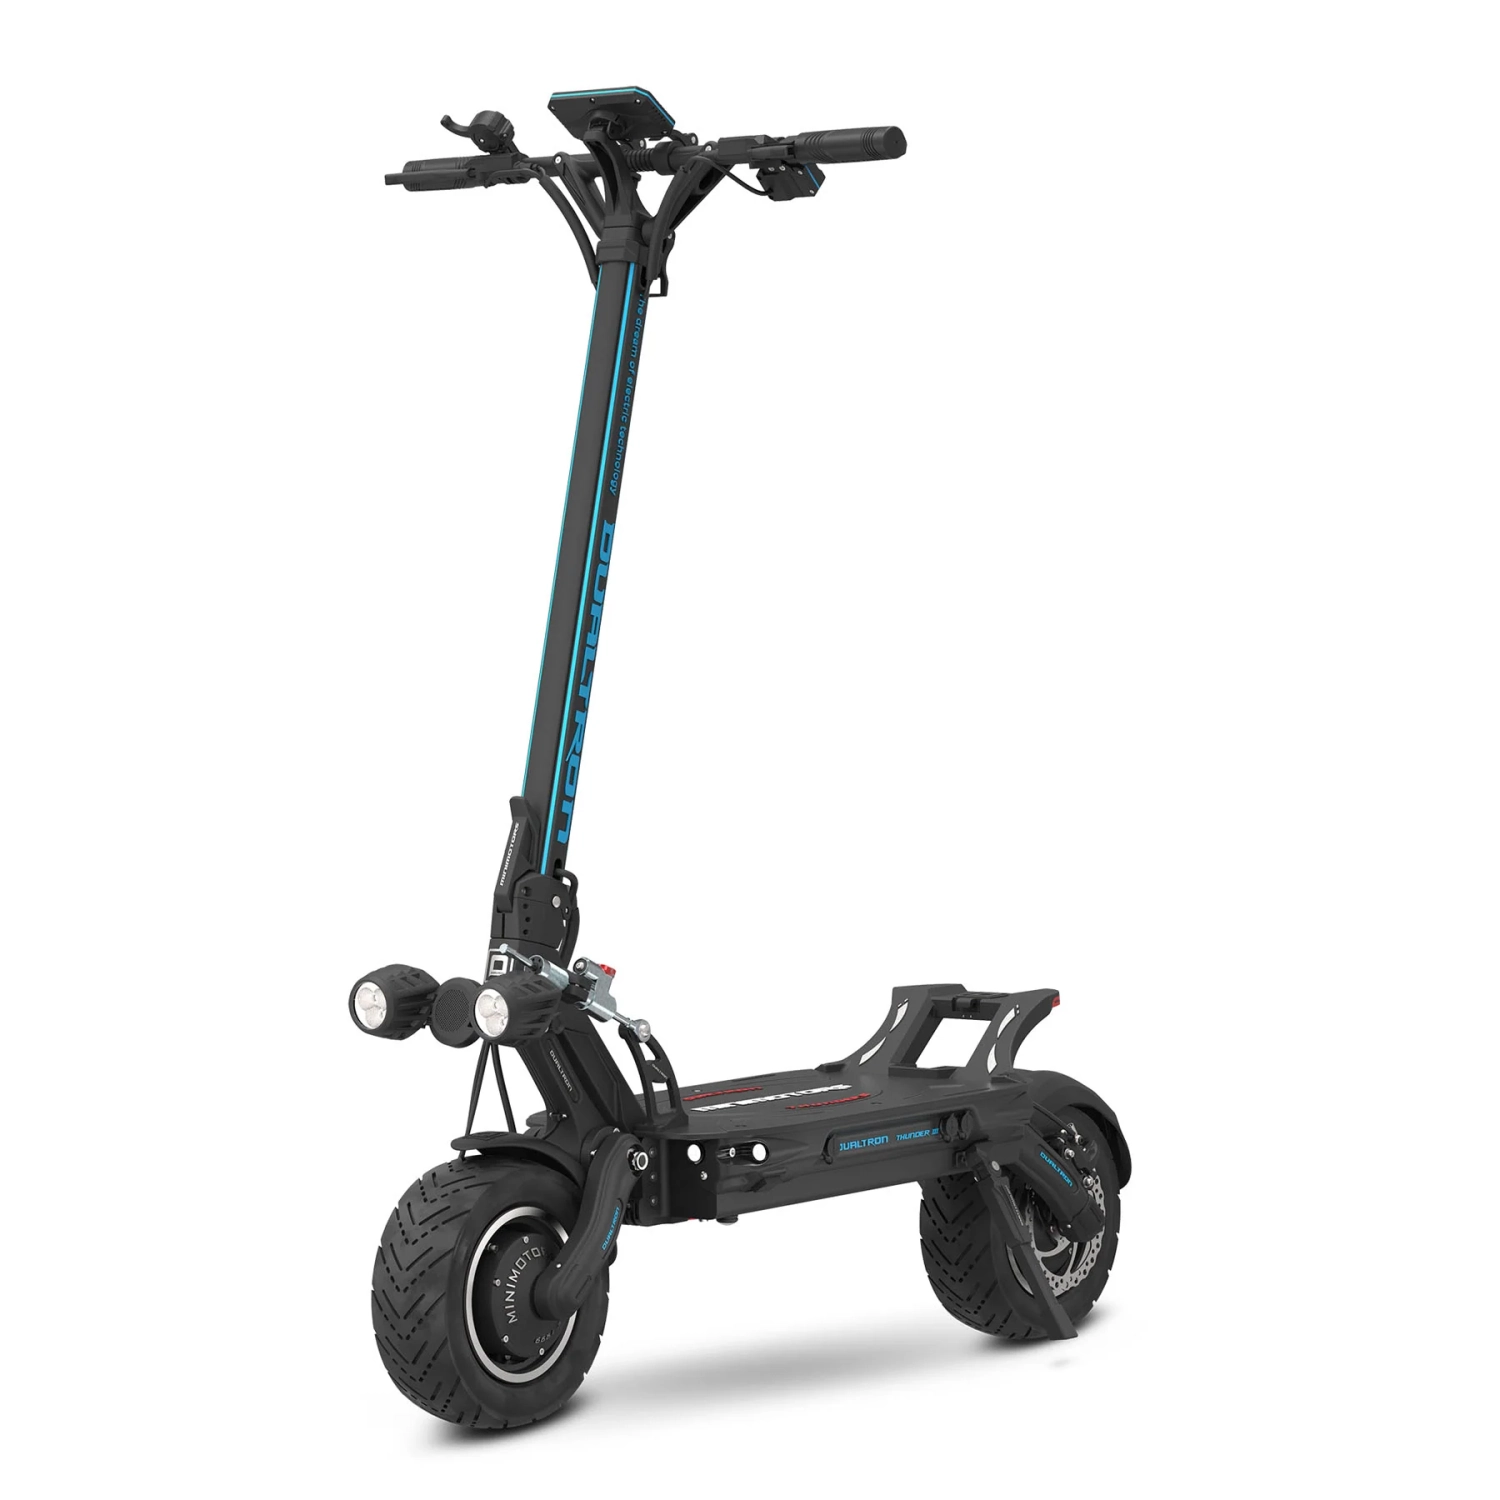 Dualtron Thunder 3 Electric Scooter (72V, 40Ah LG) | Dual Motor | Full Suspension | Up to 160KM Range | 90KM/h Top Speed | Foldable Electric Scooter for Adults